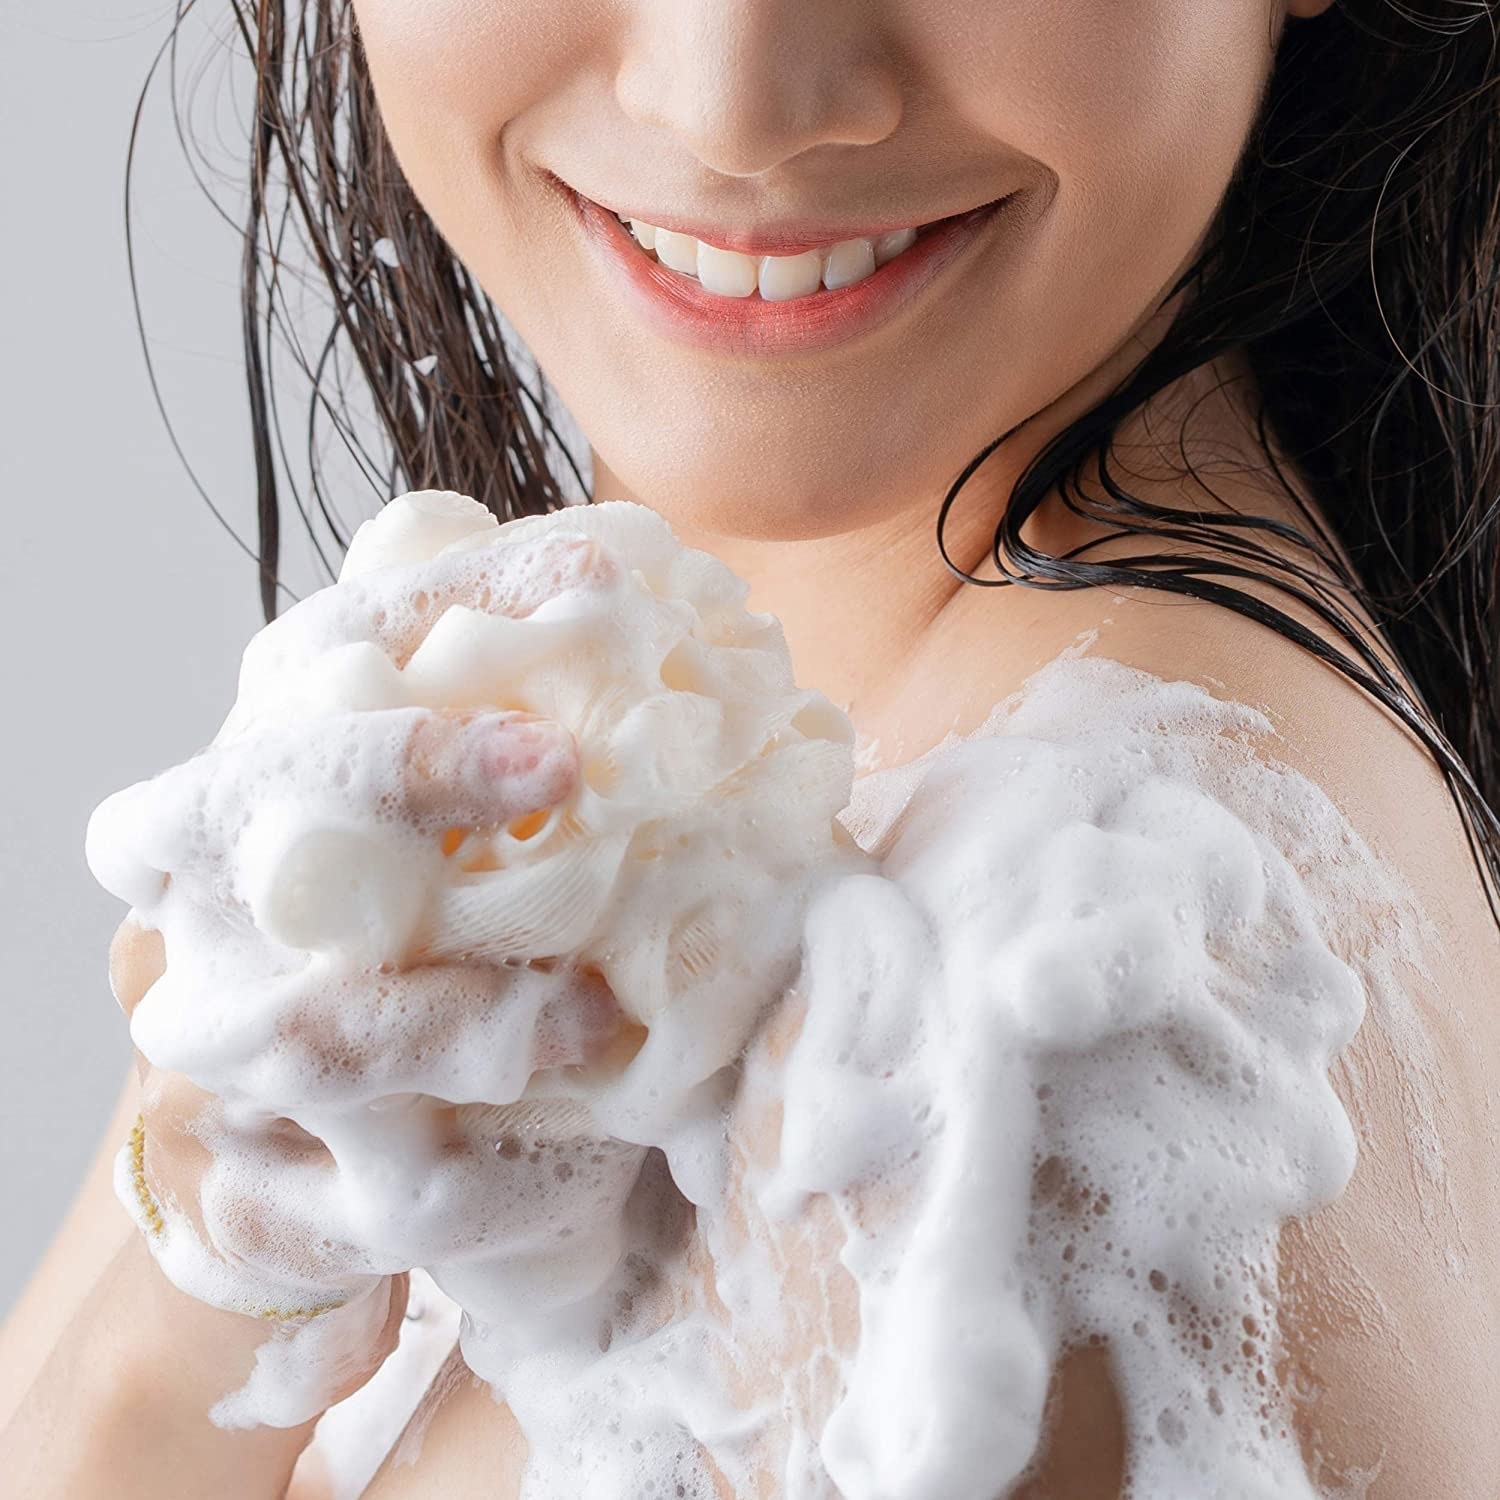 person lathering the wash on their shoulder with a loofah